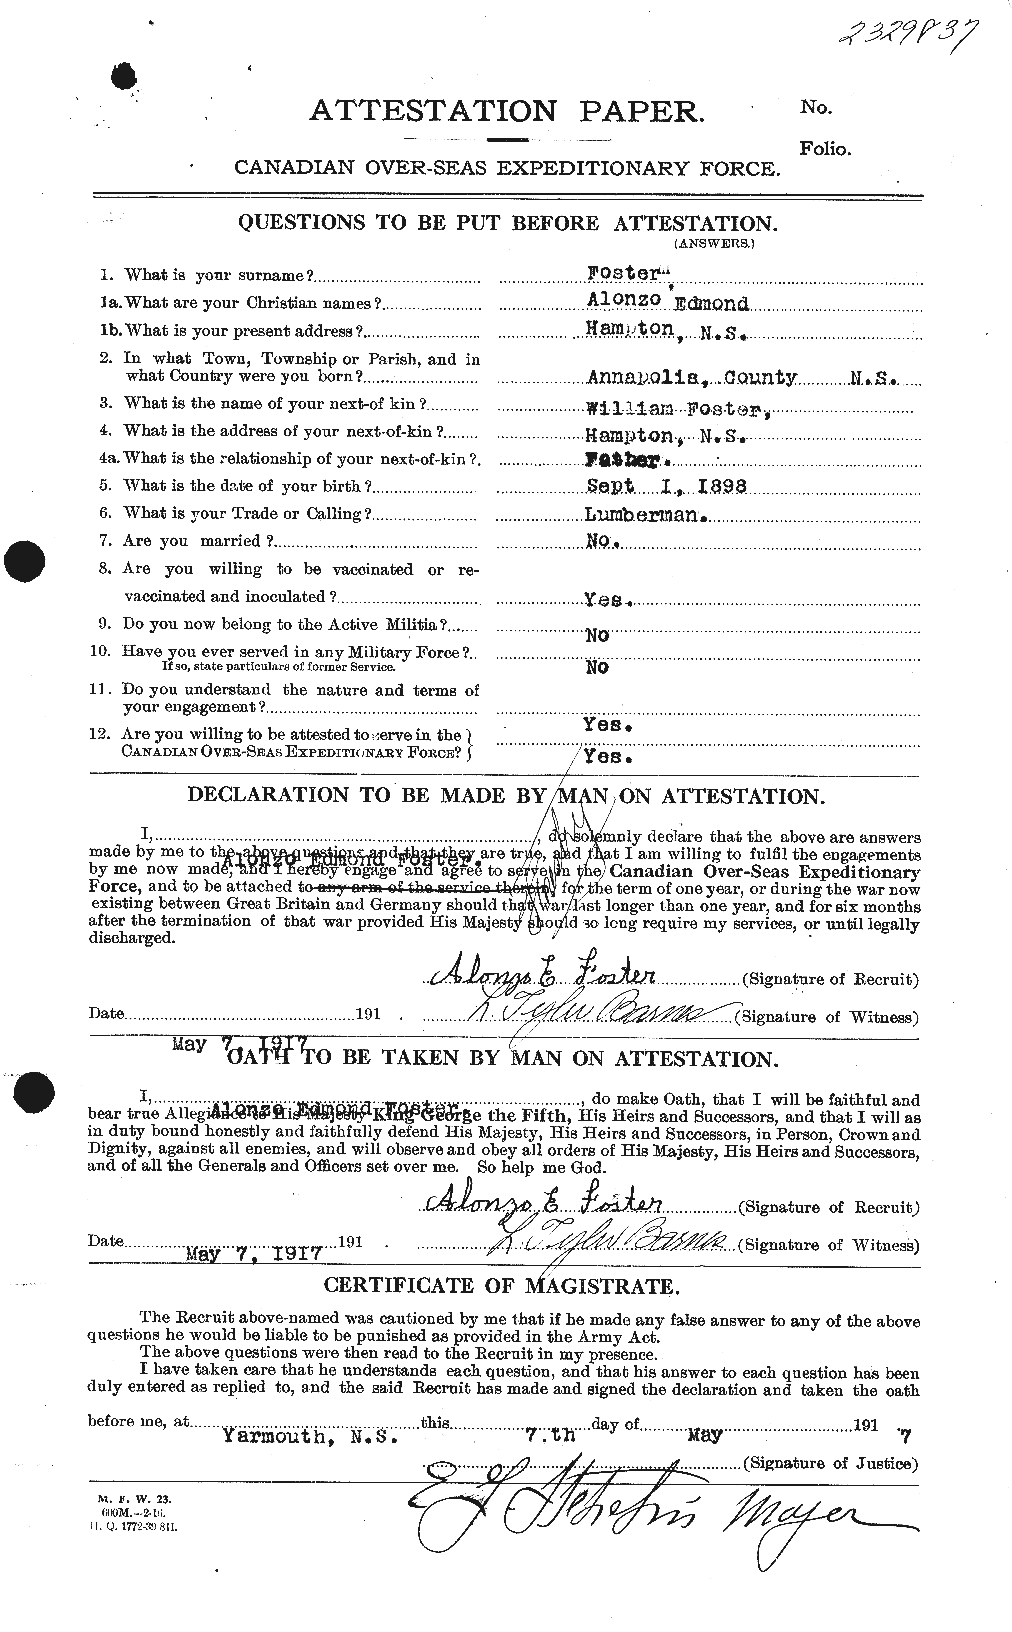 Personnel Records of the First World War - CEF 330453a